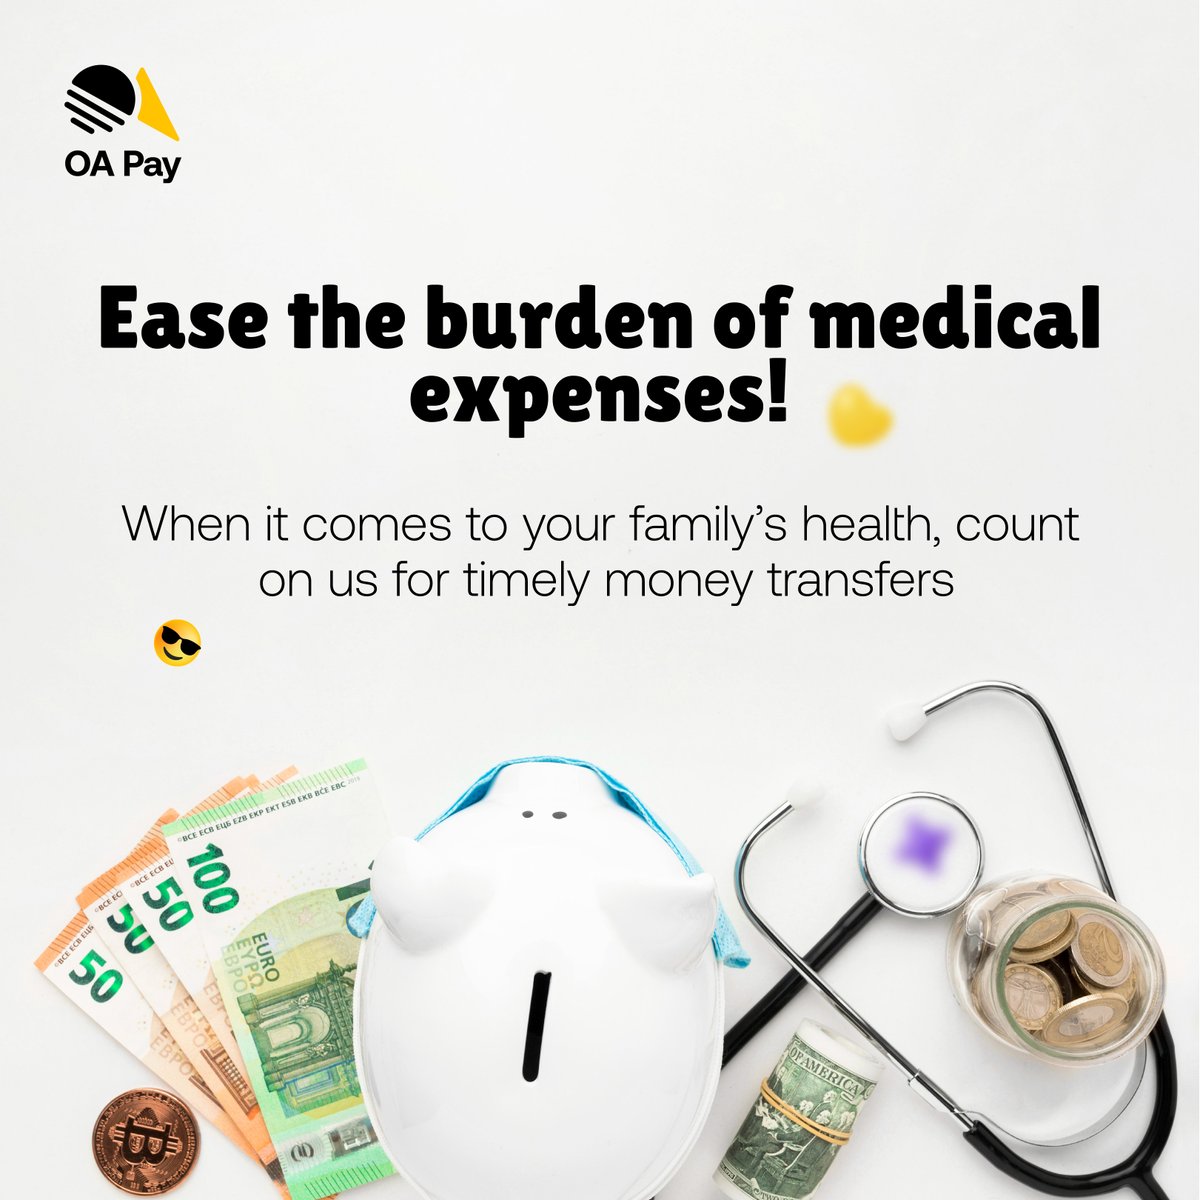 Unexpected medical bills? 💉🩺

Don't stress — Count on us for swift money transfers to ease the burden and ensure your loved ones get the care they need 💵🌍

#MedicalBills #HealthcareCosts #MedicalExpenses #HospitalBills #OAPay #OneAfrica #RemitWithOAPay #MoneyTransferApp